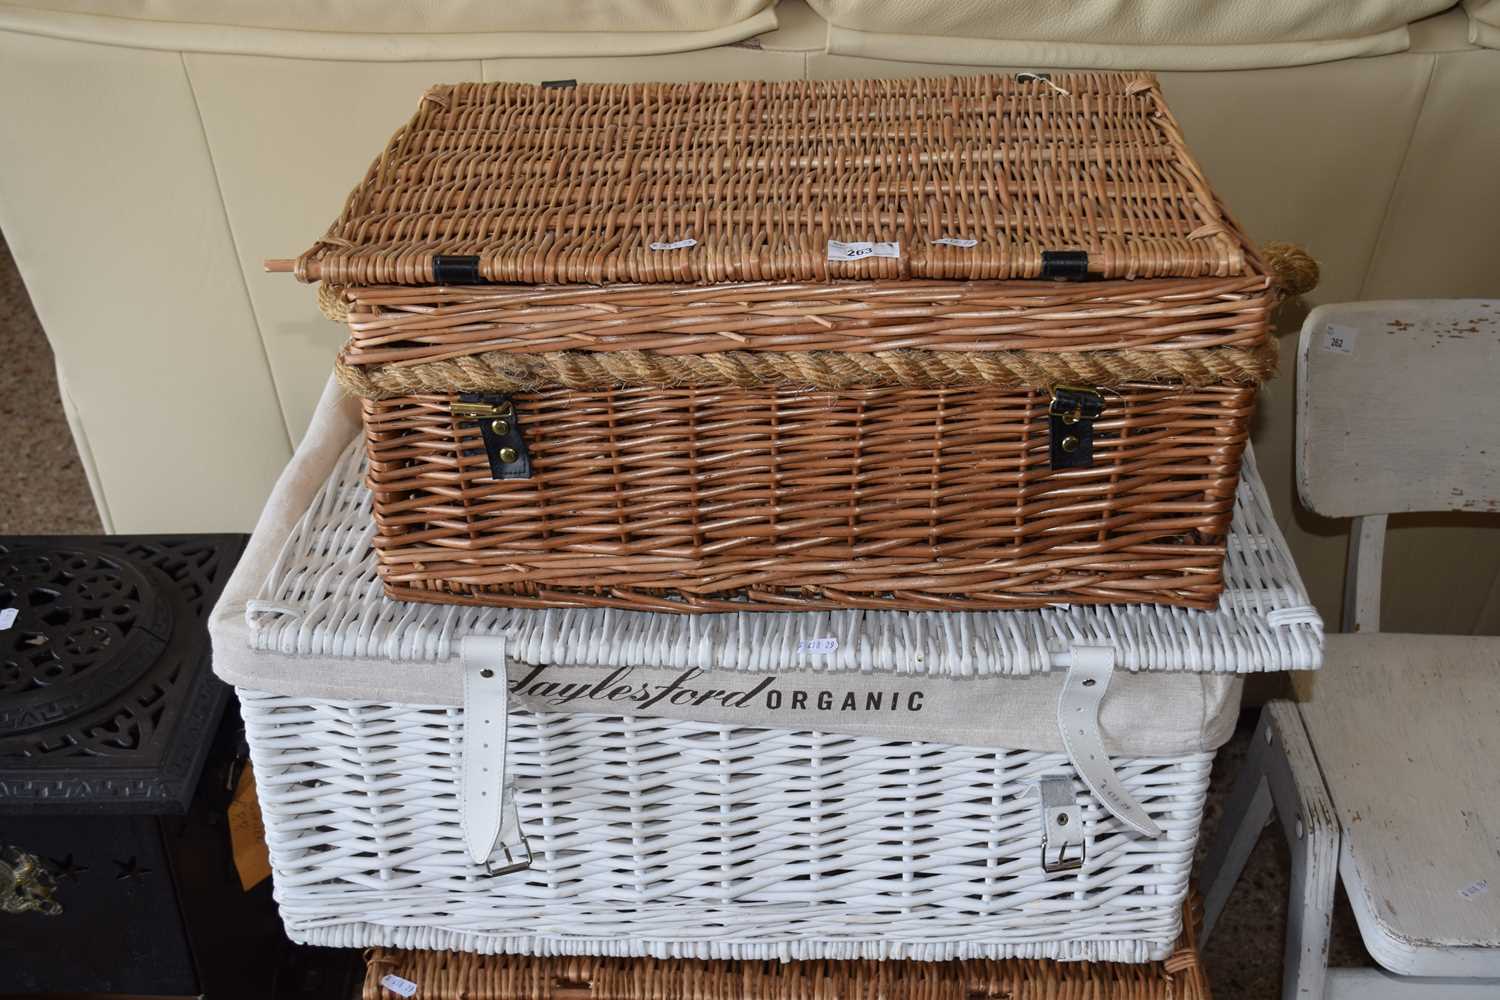 A Daylesford organic hamper basket together with one other